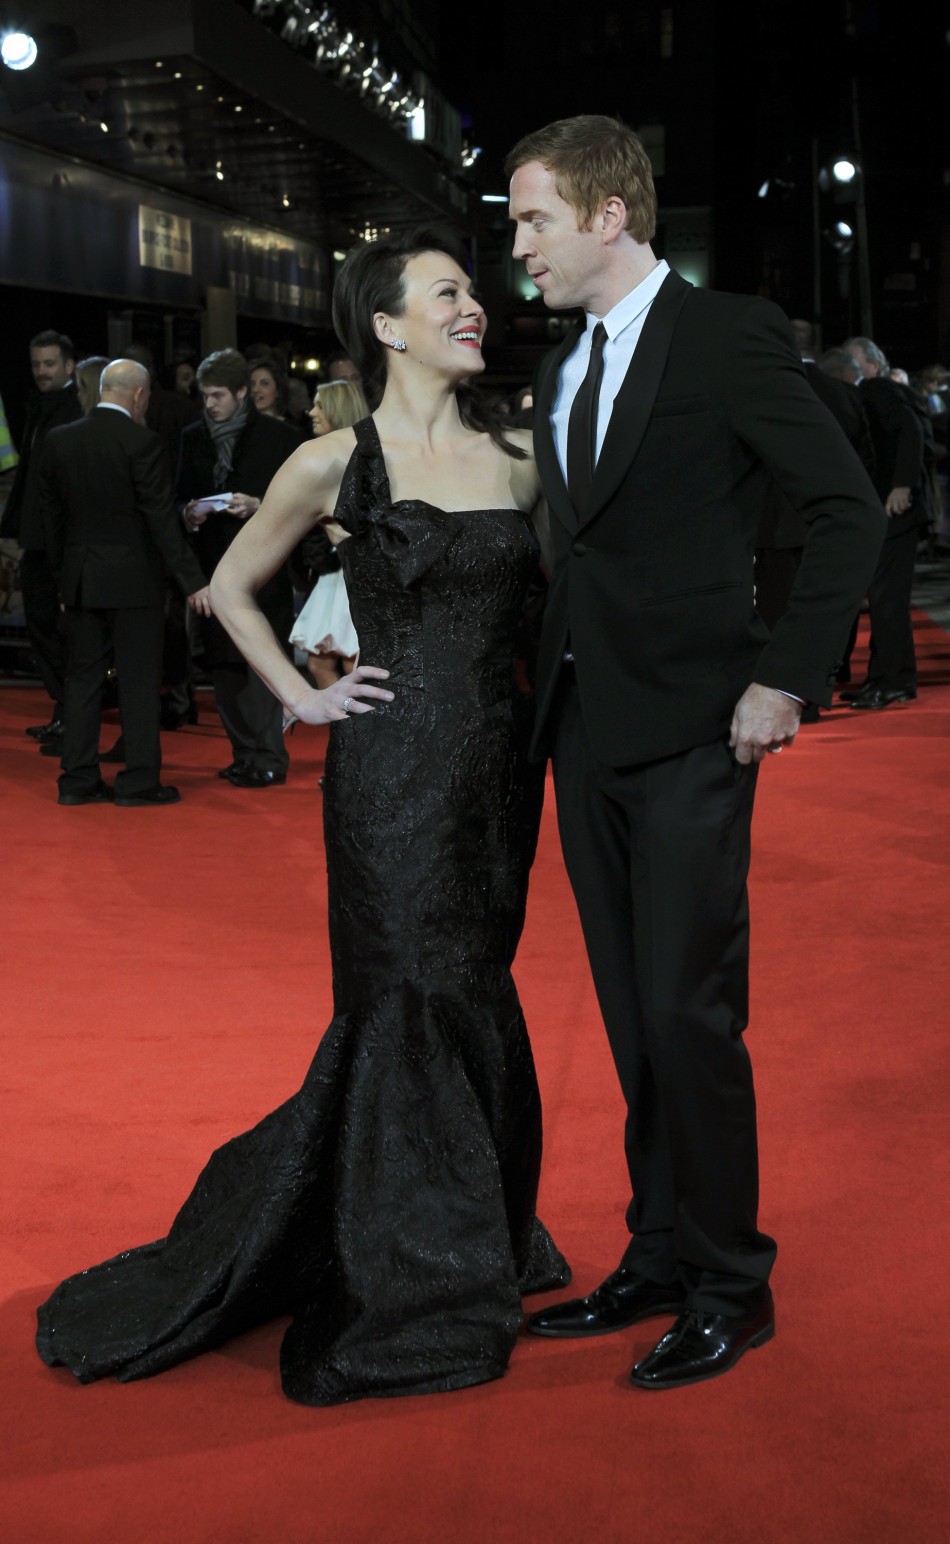 Actors Helen McCrory and Damien Lewis arrive at The Royal Premiere of director Martin Scorseses film Hugo at the Odeon Leicester Square cinema in London